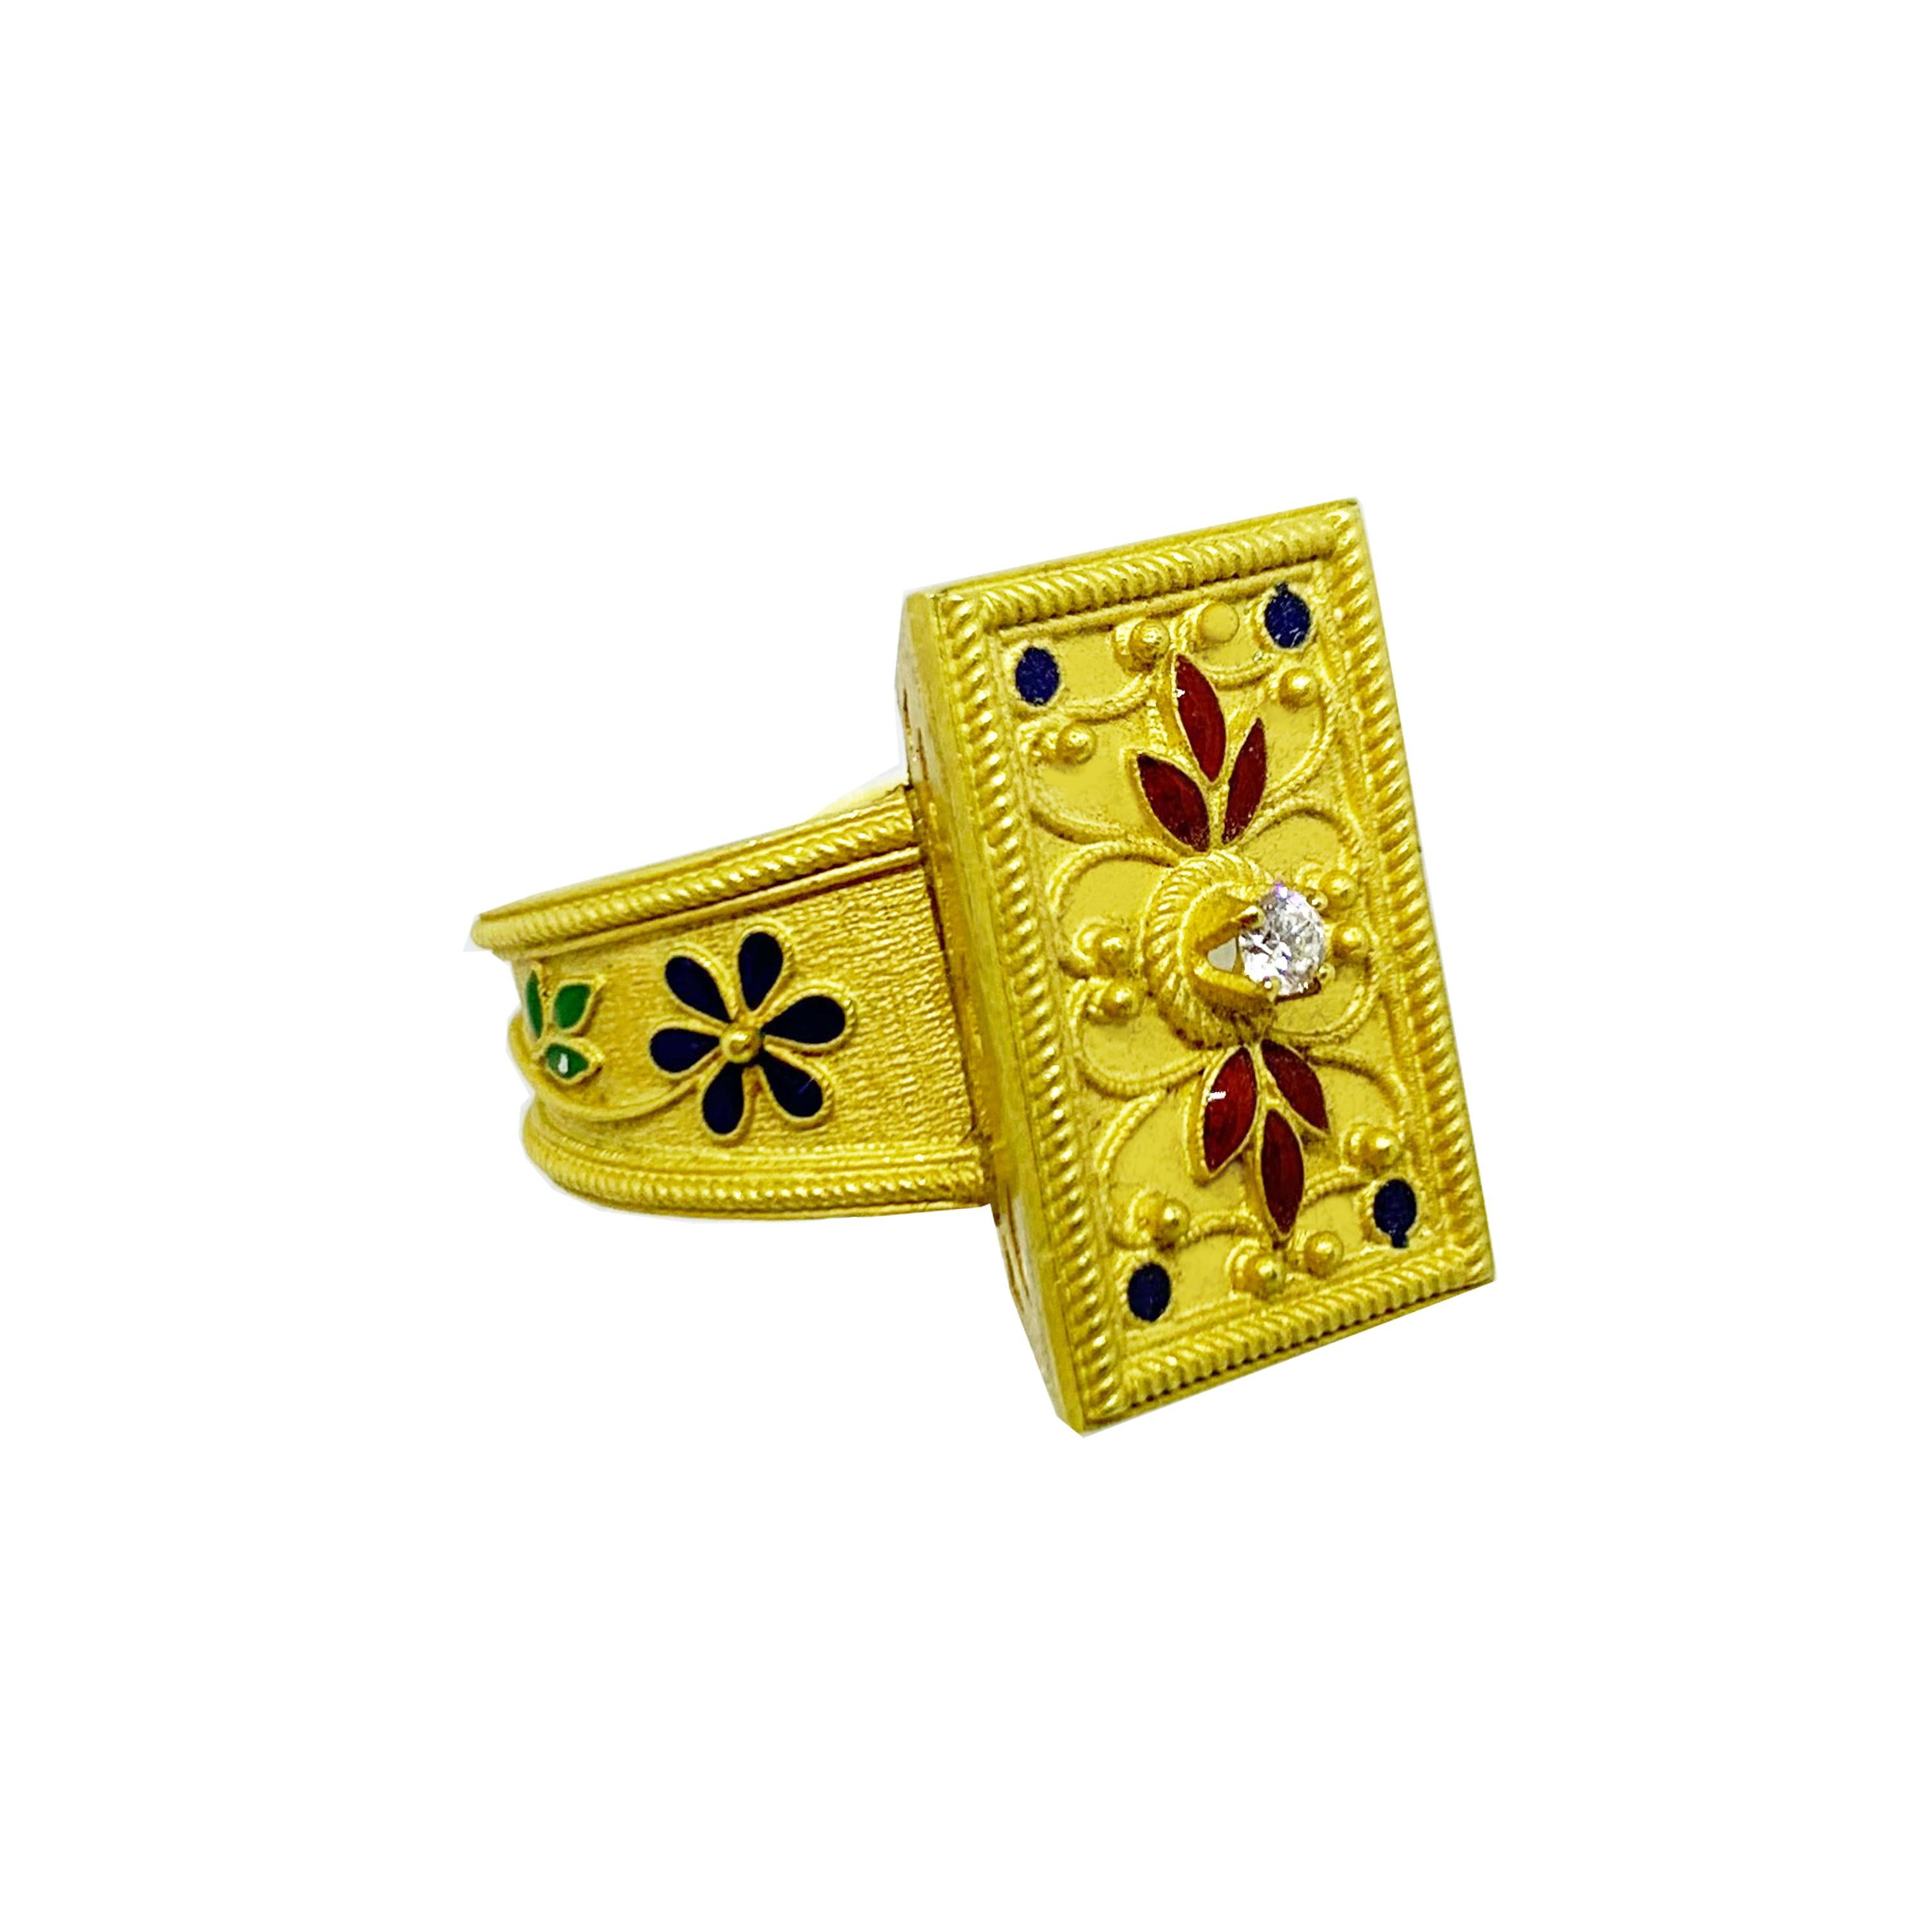 This 18 Kr gold ring, with brilliant and enamels, was made by one of the craftsmen of my shop, opened in 1910 and located in via Margutta 57, a few steps from the Spanish Steps.

The excellent manufacture recalls the Etruscan manufacturing. In fact,